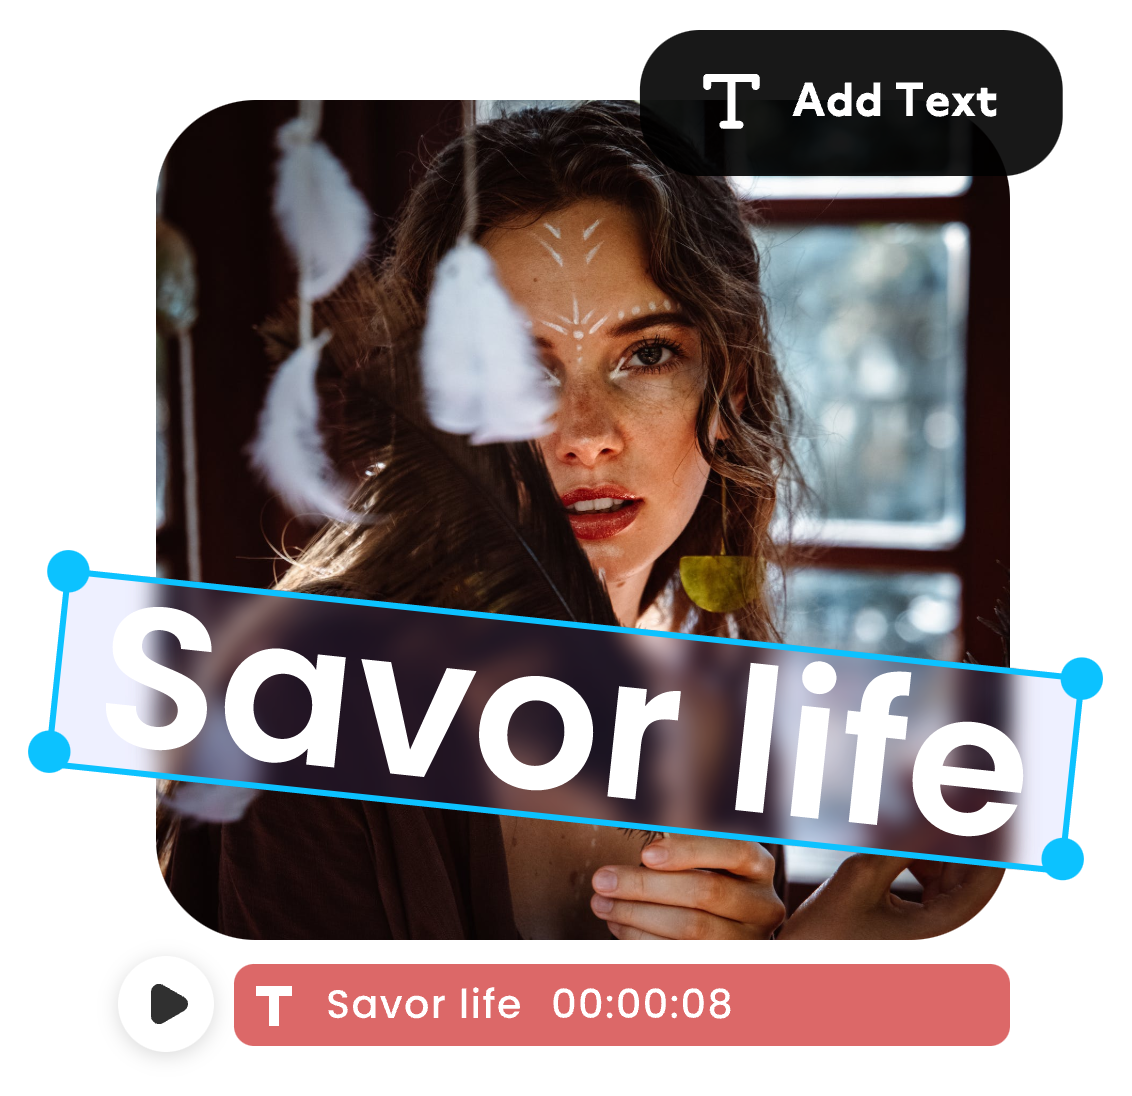 Add text of savor like to a video in Clipfly